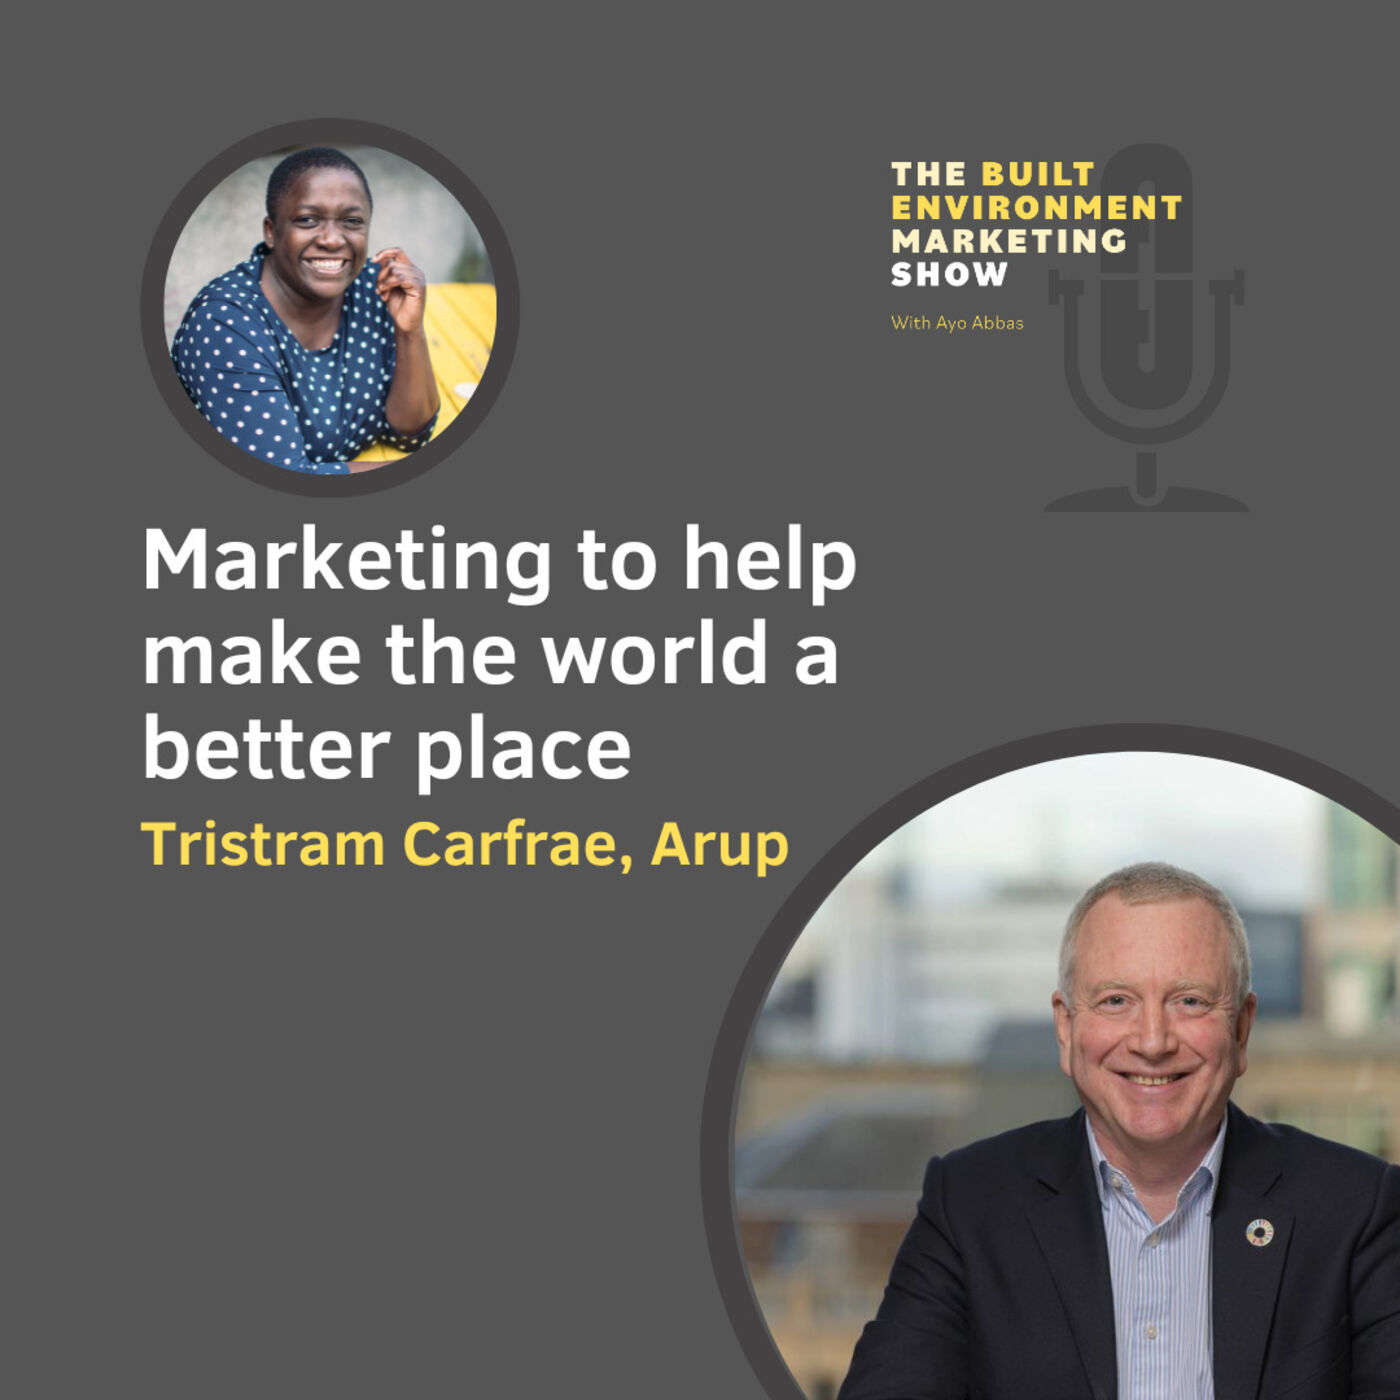 Ep 47: Marketing to help make the world a better place, with Tristram Carfrae, Arup